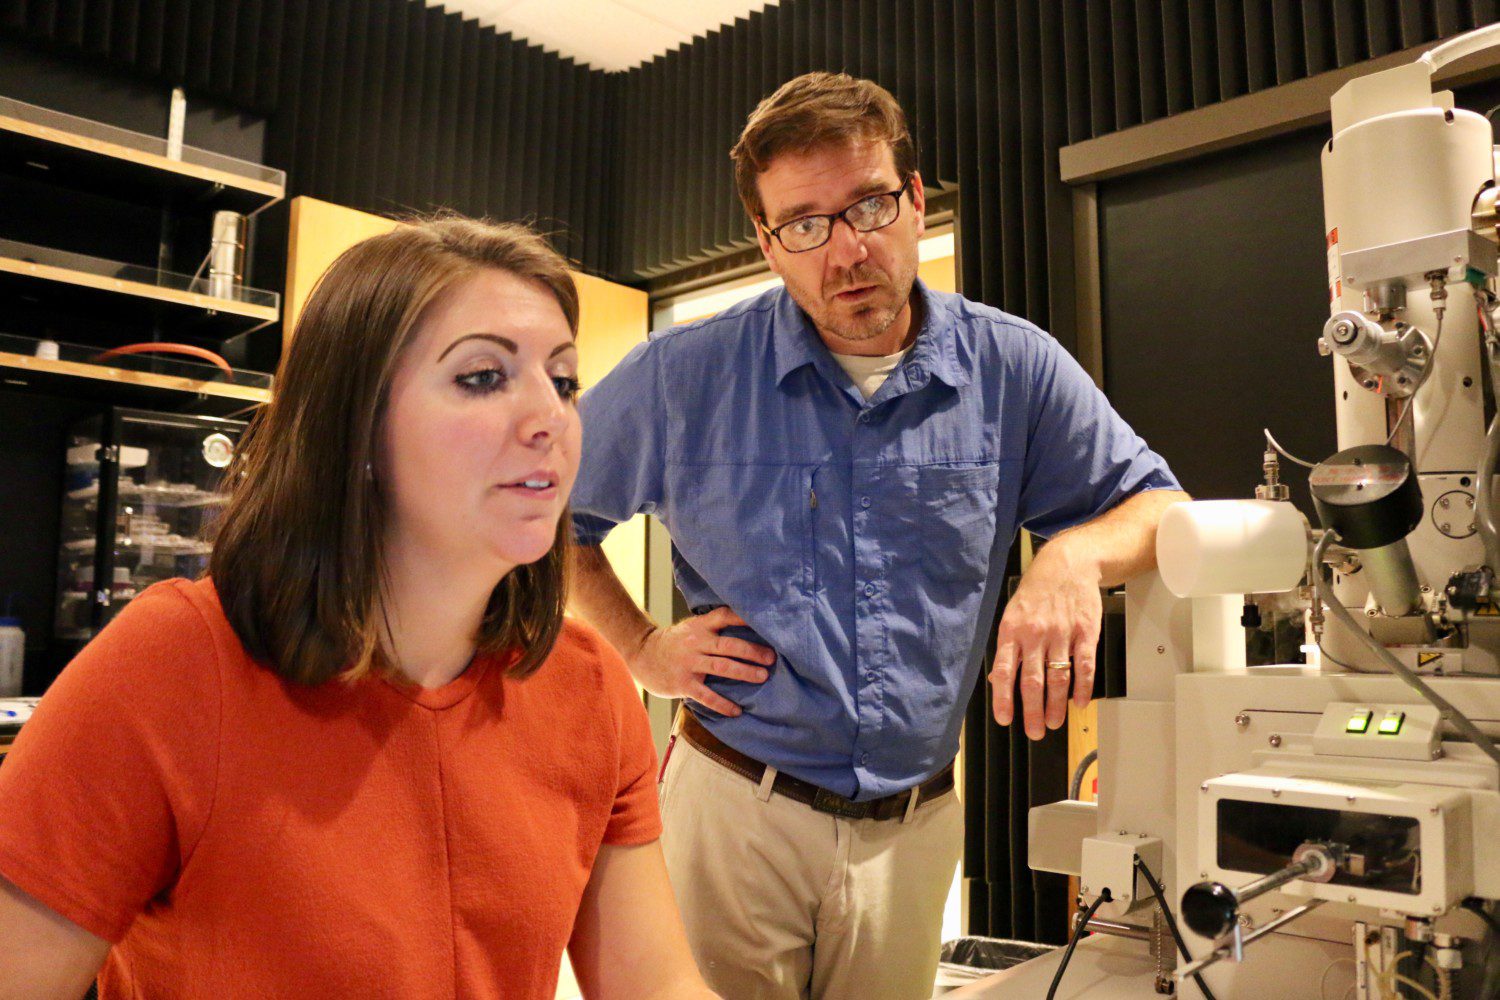 PhD student Kathryn Peruski works at the Electron Microscope Facility with Brian Powell, Fjeld professor in nuclear environmental engineering and science.